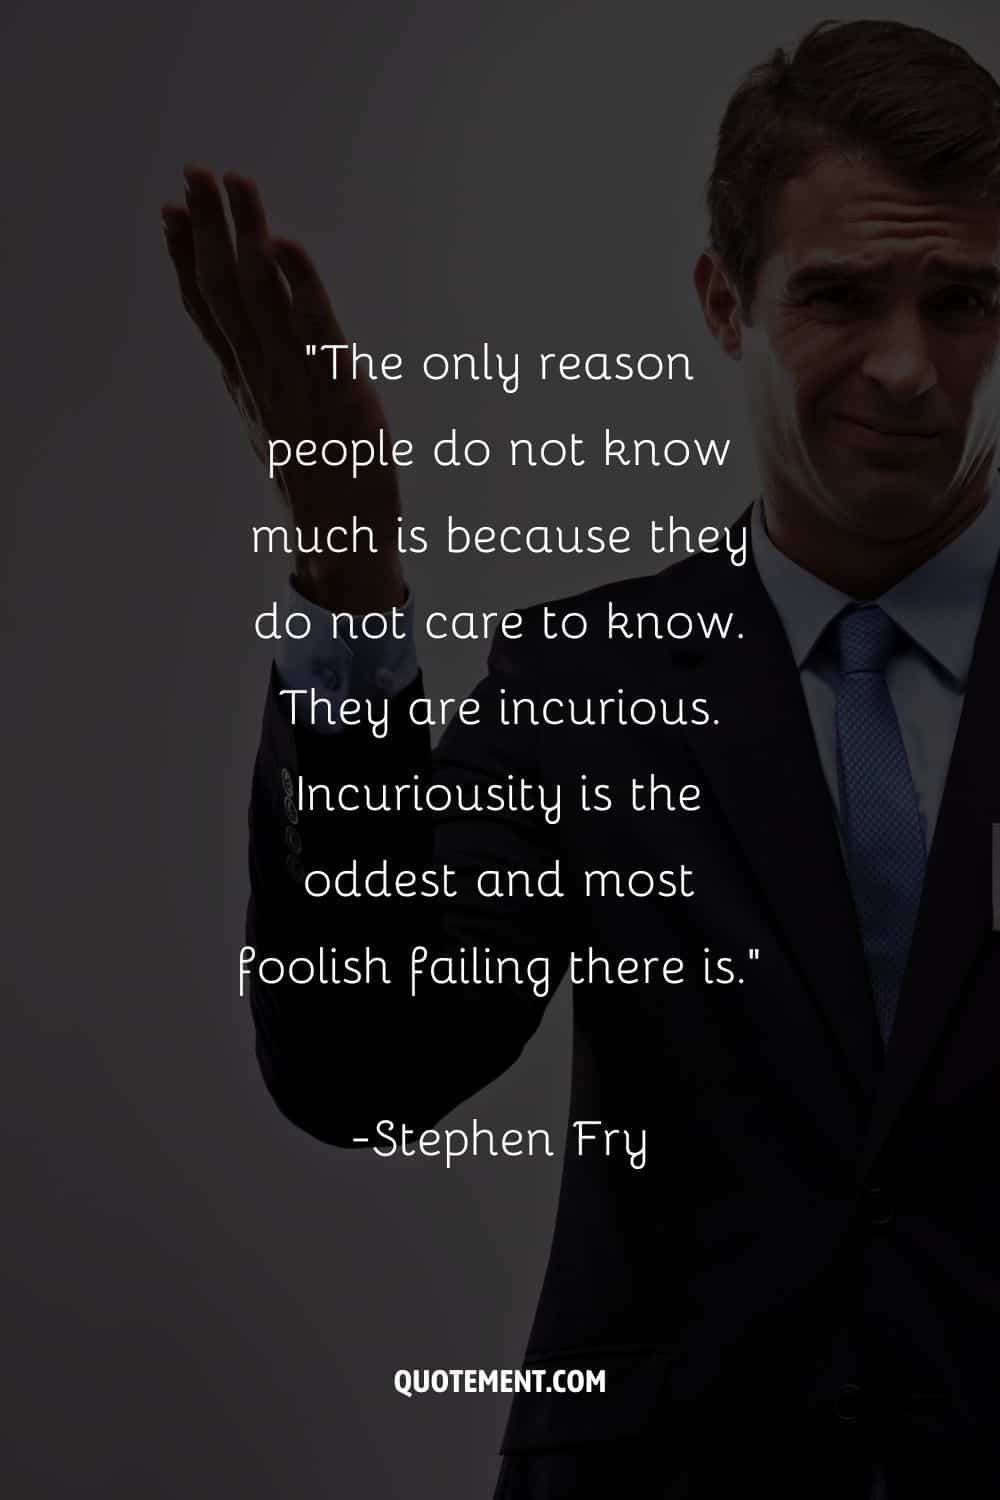 The only reason people do not know much is because they do not care to know.